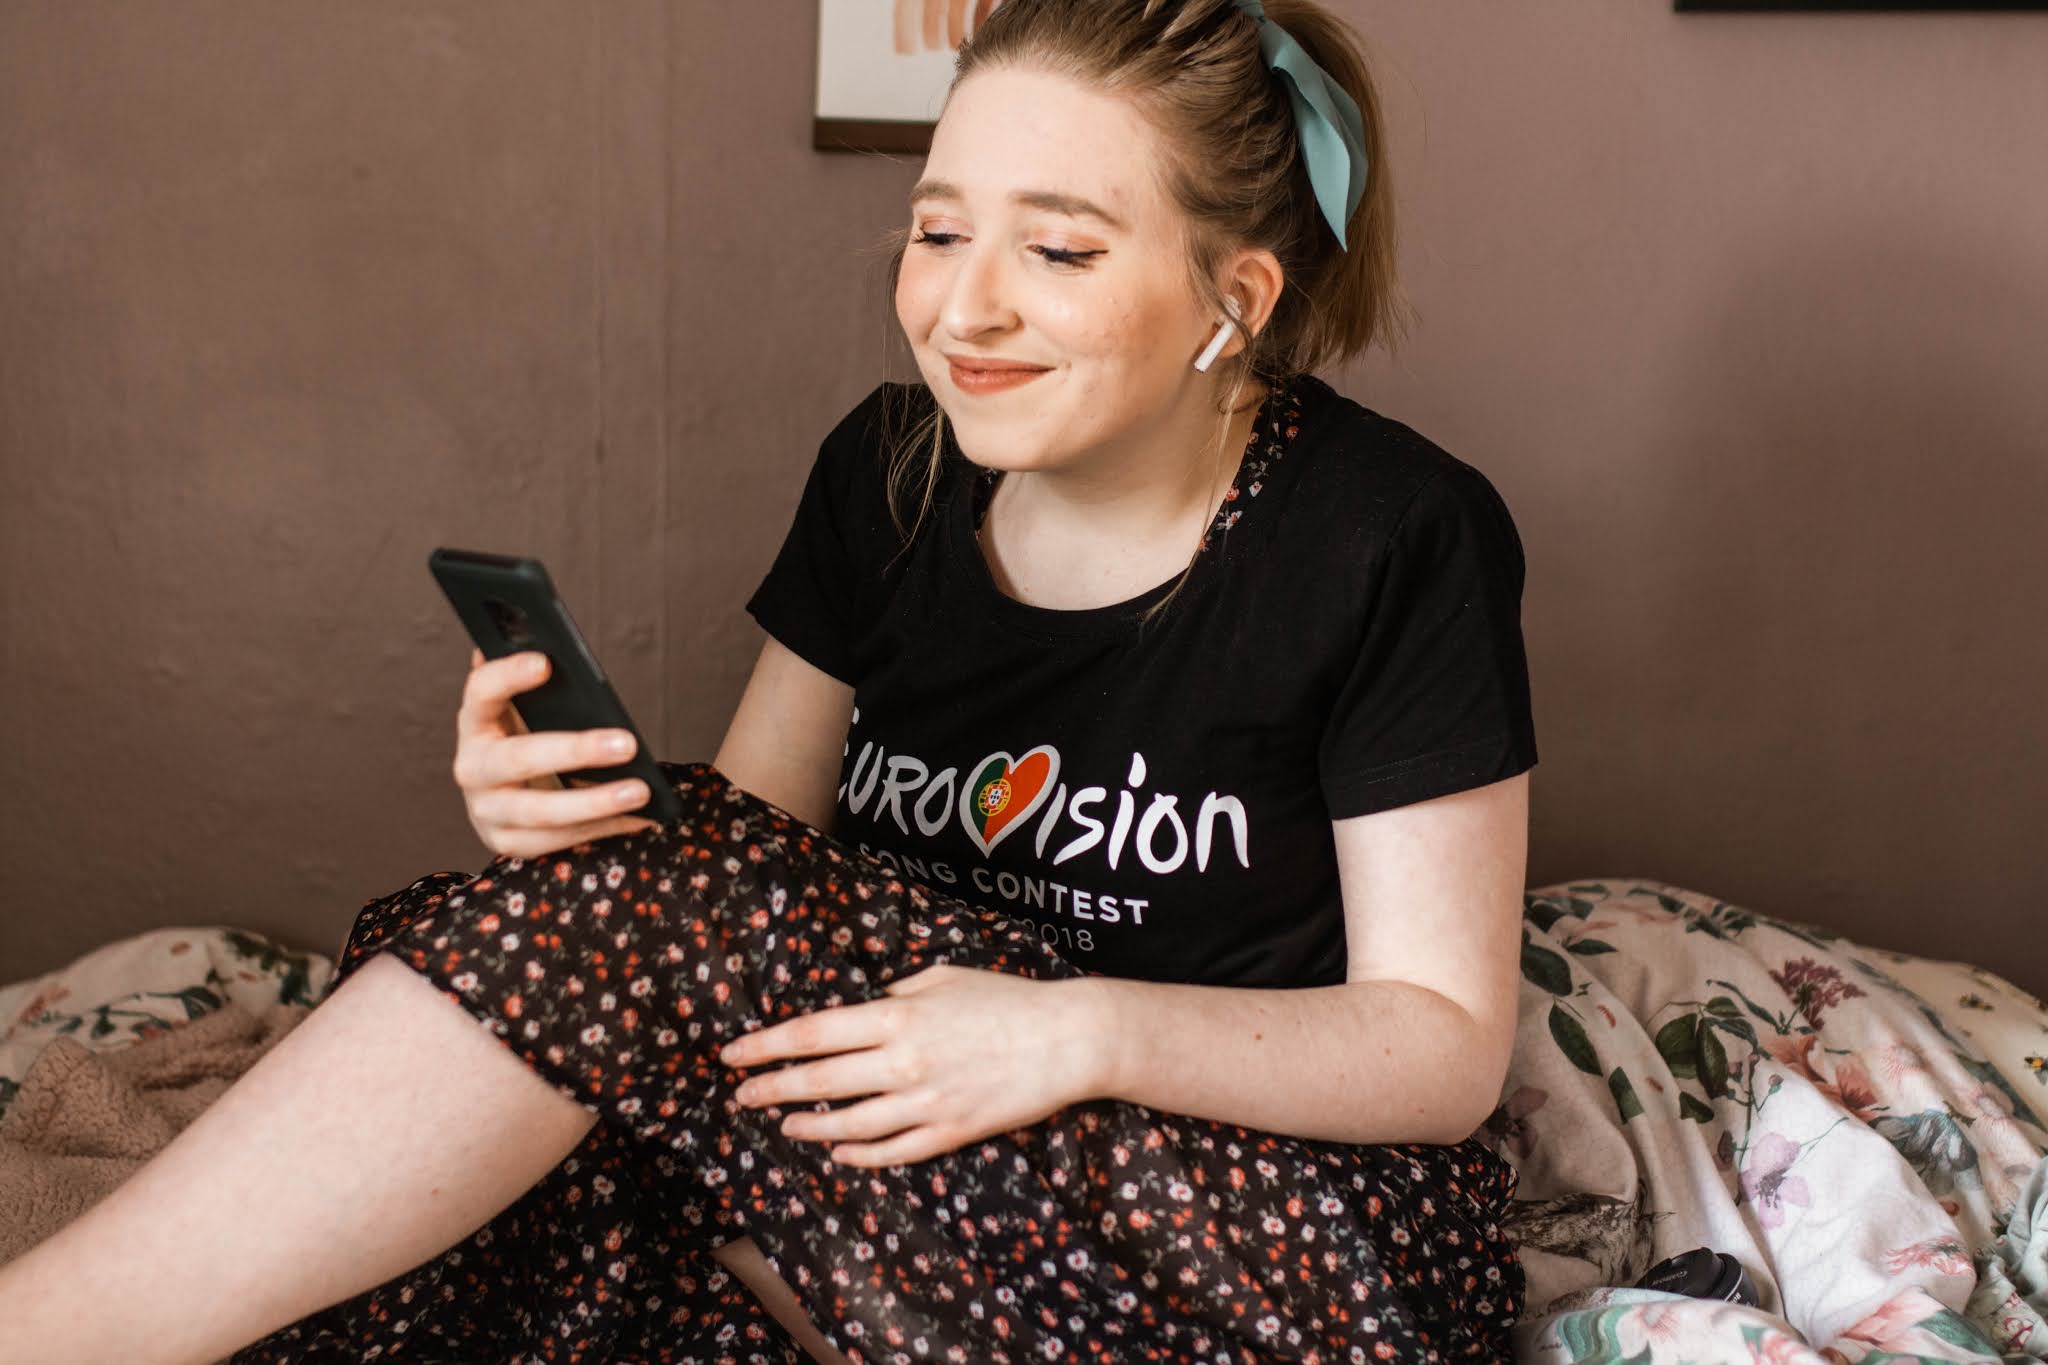 girl smiling with bow in hair listening to music on airpods with eurovision t shirt